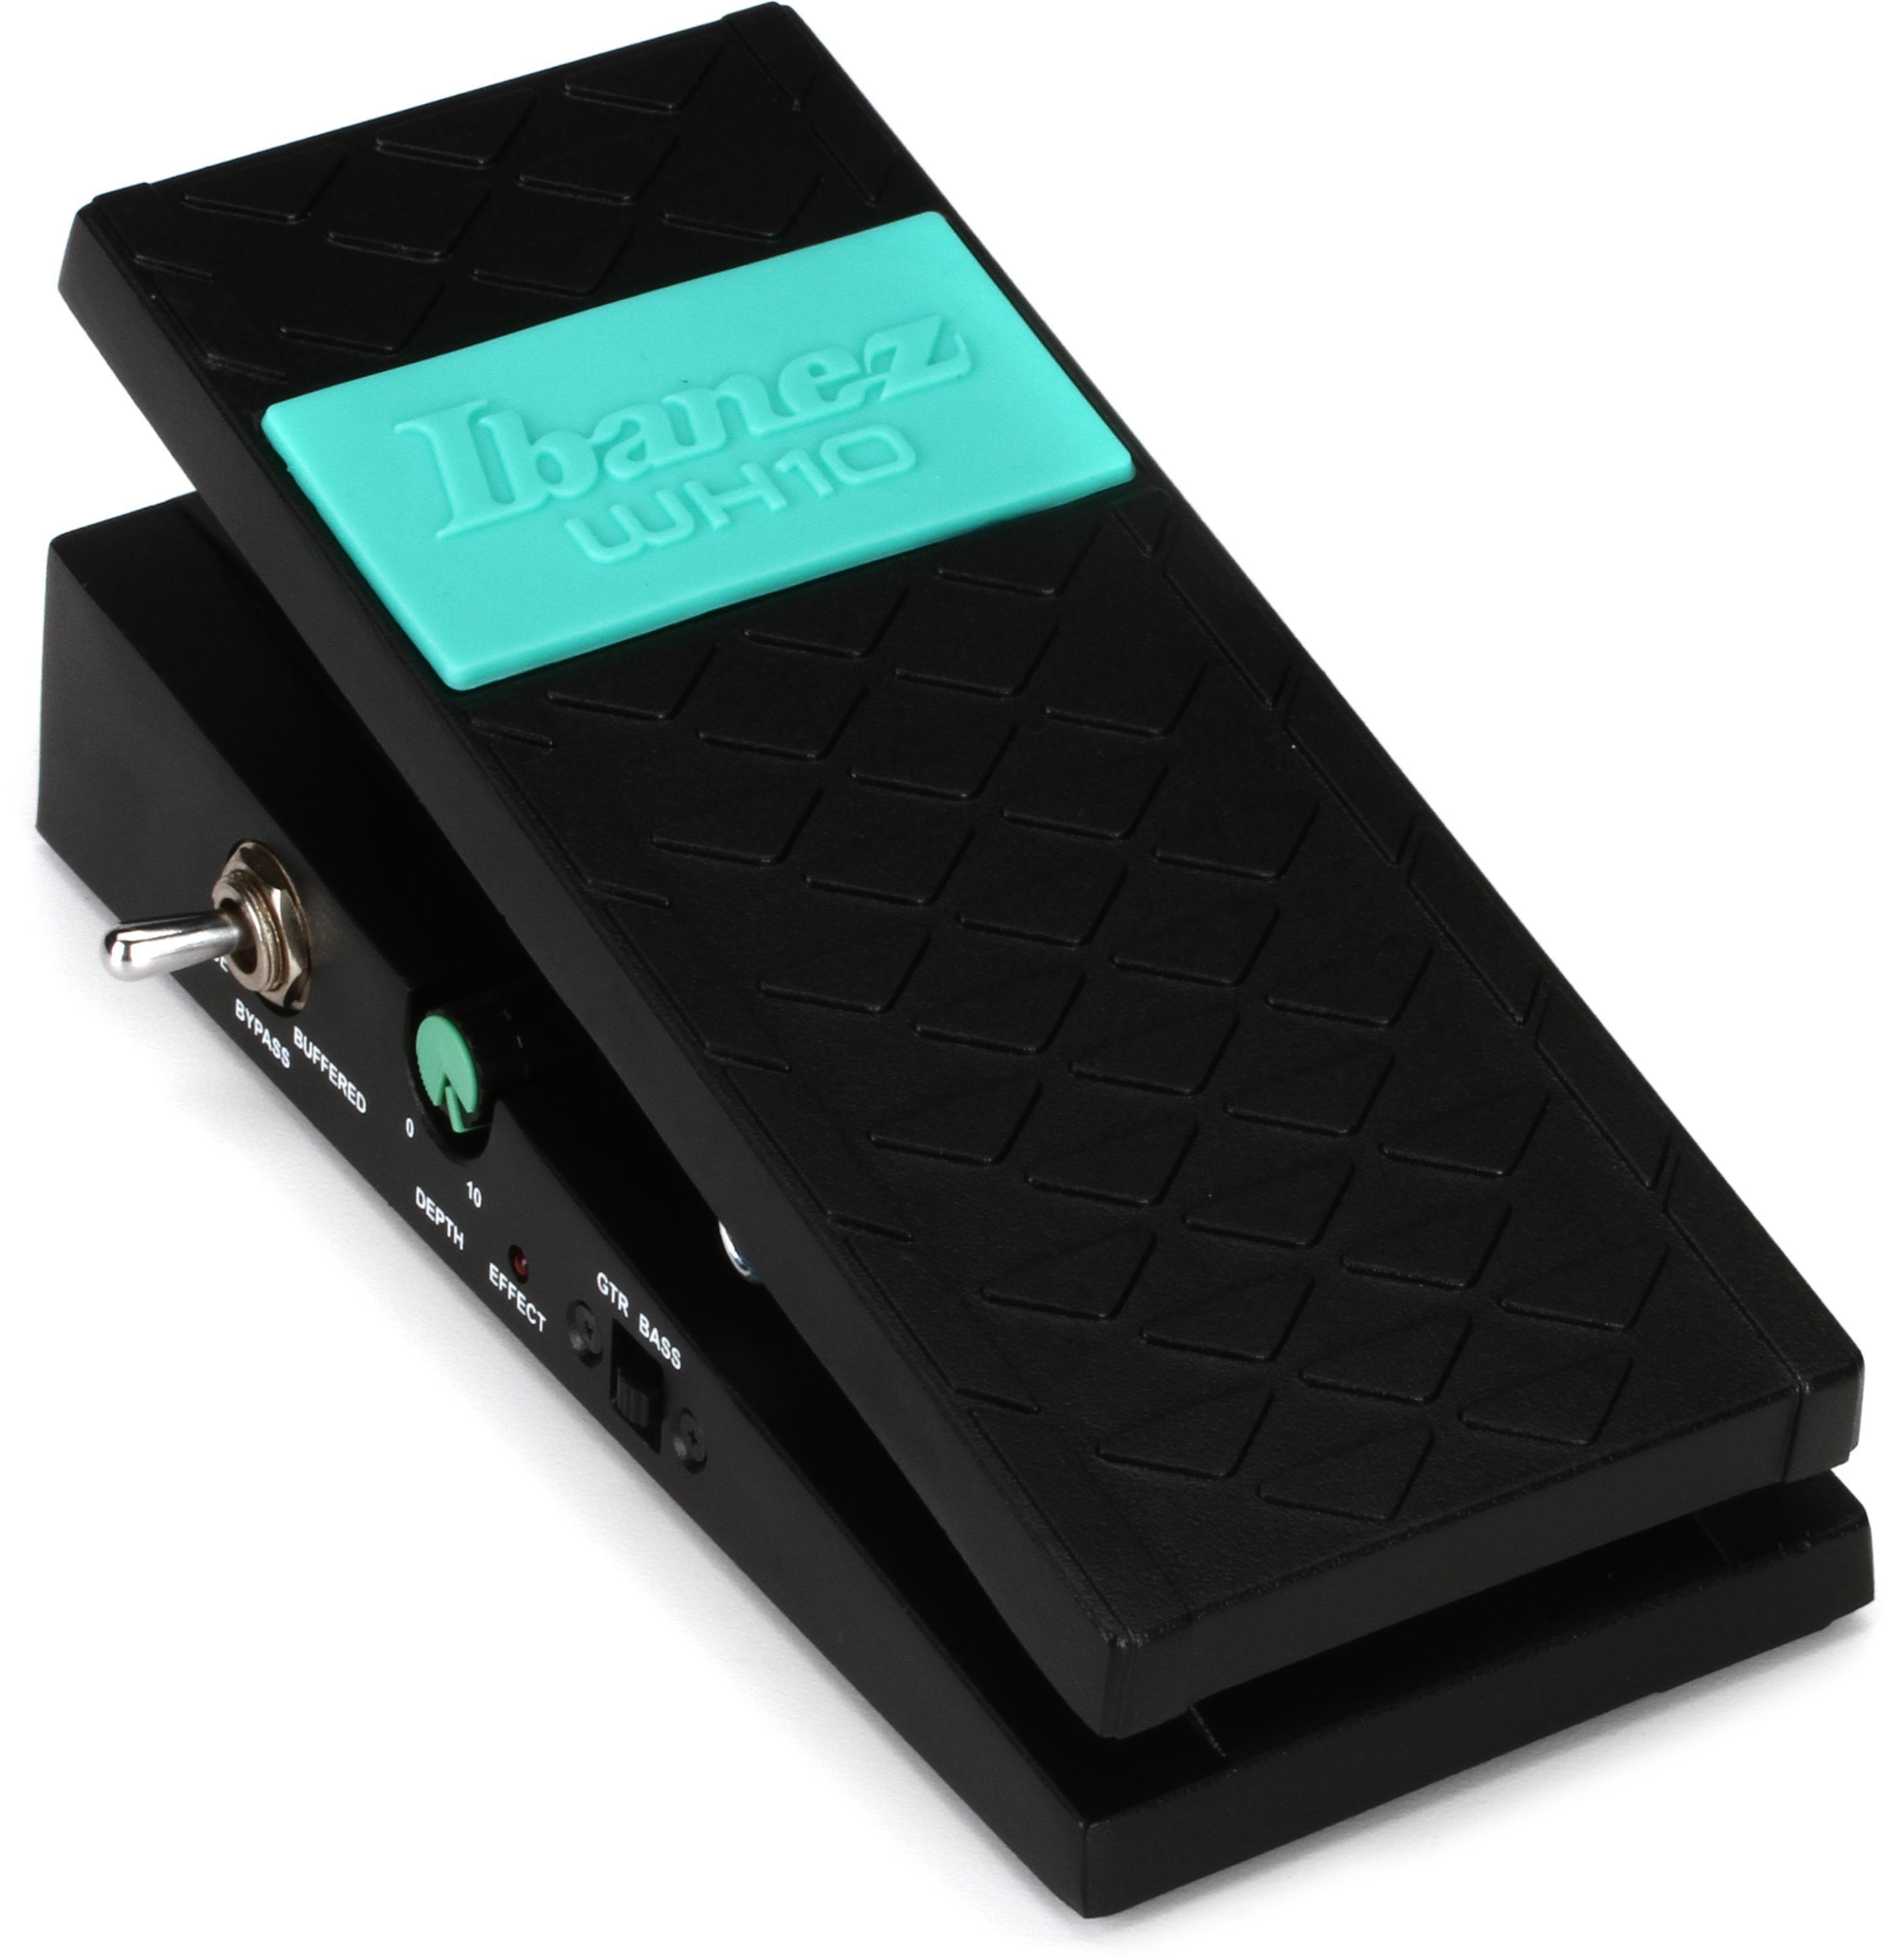 Ibanez WH10 V3 Wah Pedal | Sweetwater